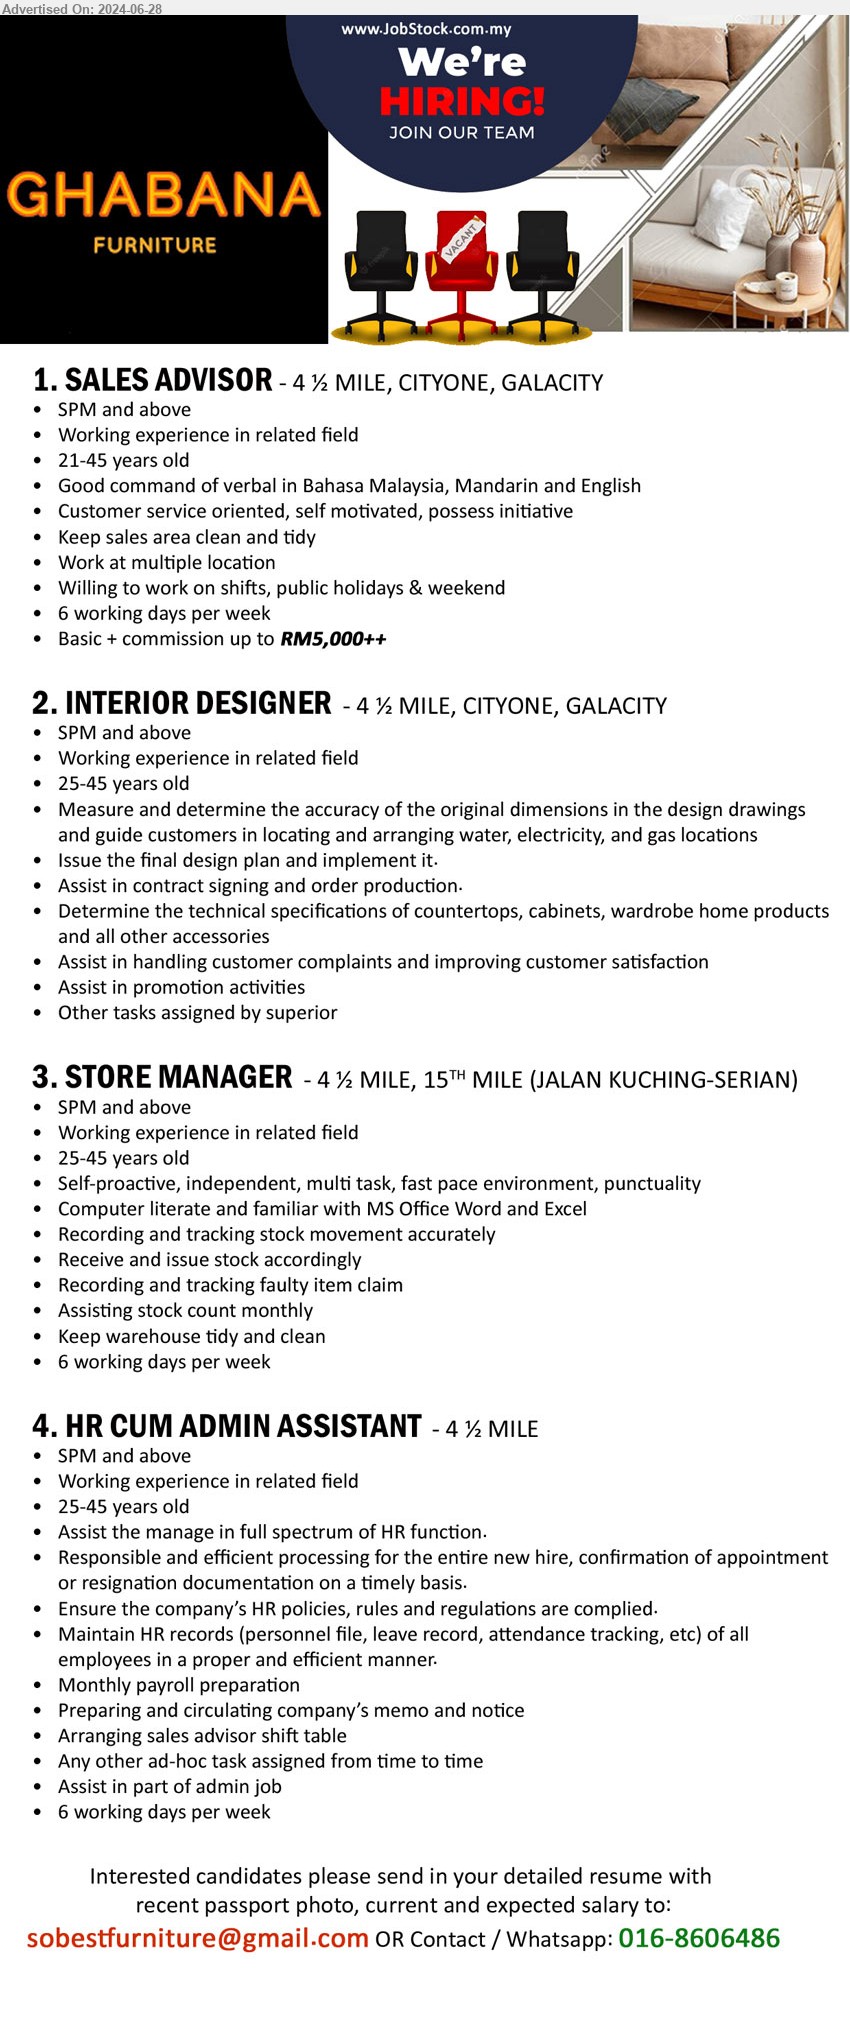 GHABANA FURNITURE - 1. SALES ADVISOR (Kuching), Basic + commission up to RM5,000++, SPM and above,...
2. INTERIOR DESIGNER (Kuching), SPM and above, working exp. in related fields, 25-45 years old,...
3. STORE MANAGER (Kuching), SPM and above, Computer literate and familiar with MS Office Word and Excel,...
4. HR CUM ADMIN ASSISTANT (Kuching), SPM and above, Assist the manage in full spectrum of HR function. ,...
Whatsapp: 016-8606486 / Email resume to ...
